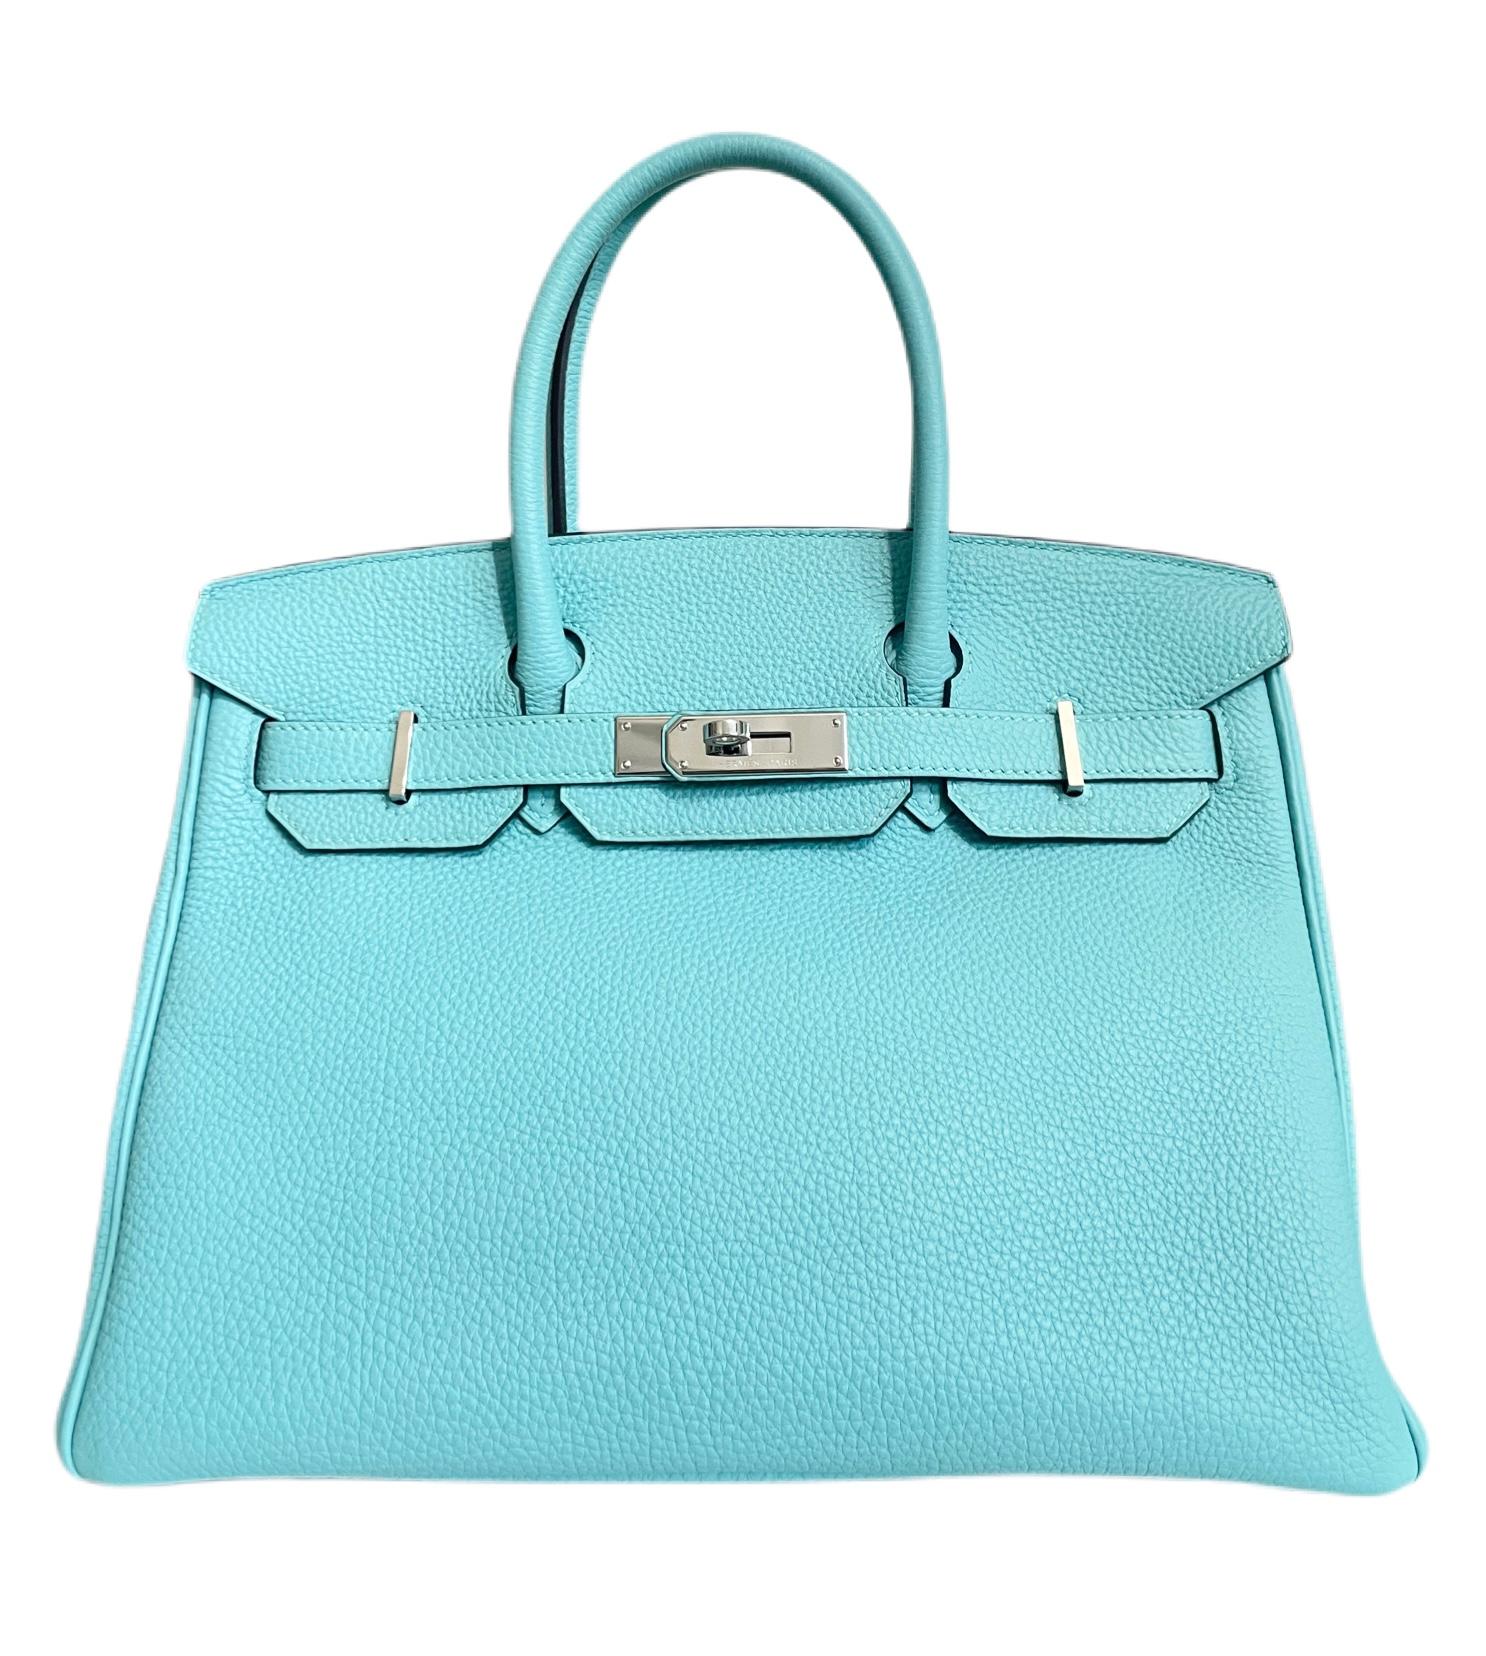 PRISTINE Hermes Birkin 30 Blue Atoll Palladium Hardware. Excellent Pristine Condition From collectors closet, with light hairlines on Hardware, excellent corners and structure. T Stamp 2015.

Shop with Confidence from Lux Addicts. Authenticity